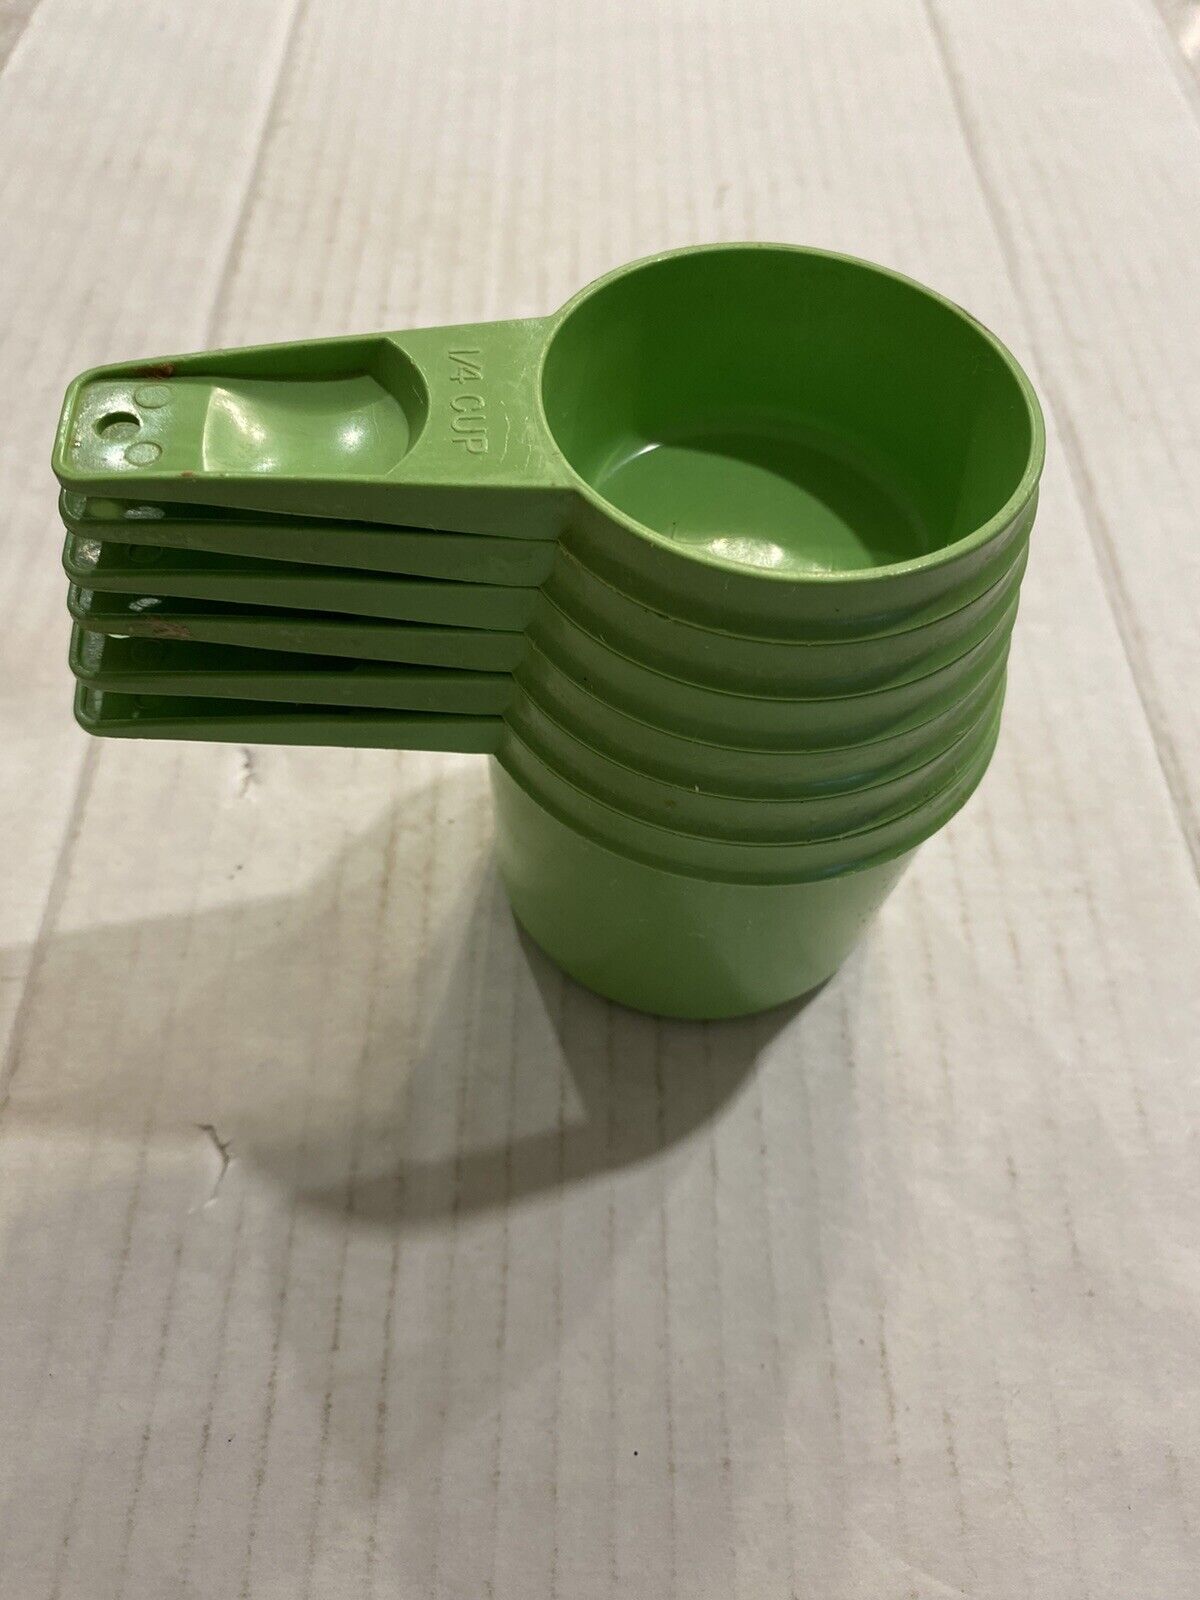 Vintage Tupperware Set of 6 Stacking Measuring Cups Lime Green Bx36